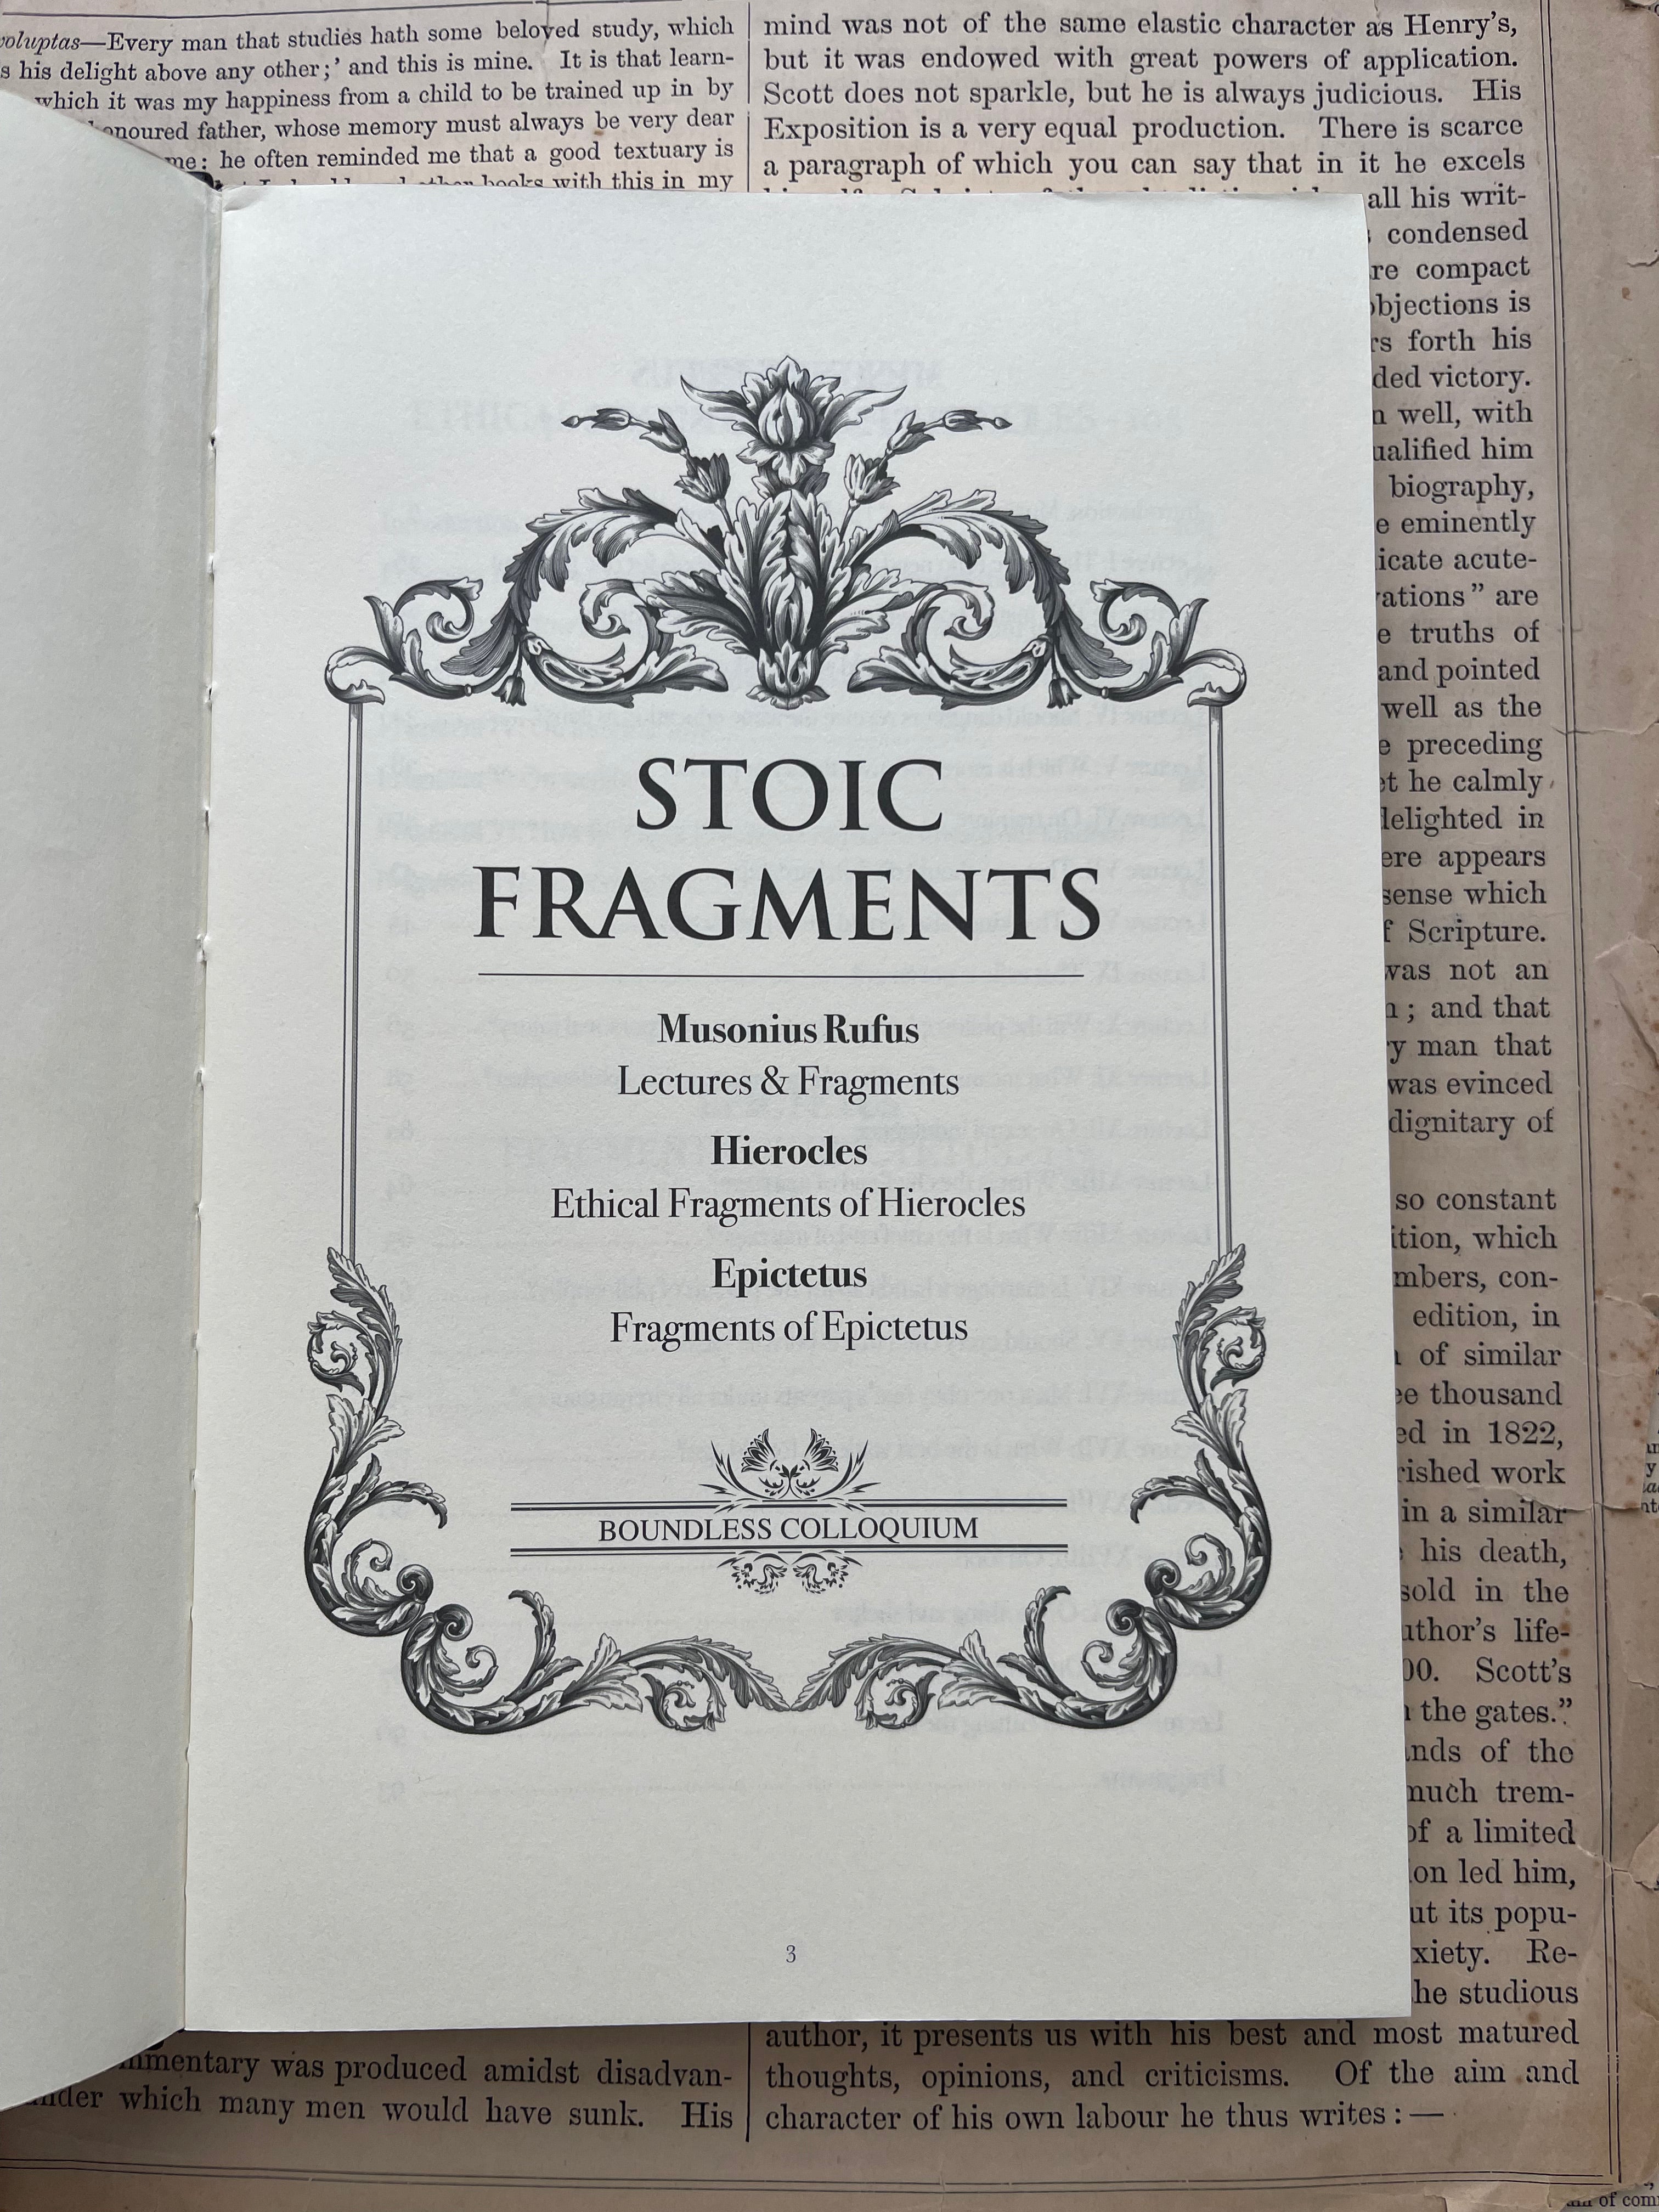 Stoic Fragments: Works from Musonius Rufus, Hierocles, and Epictetus